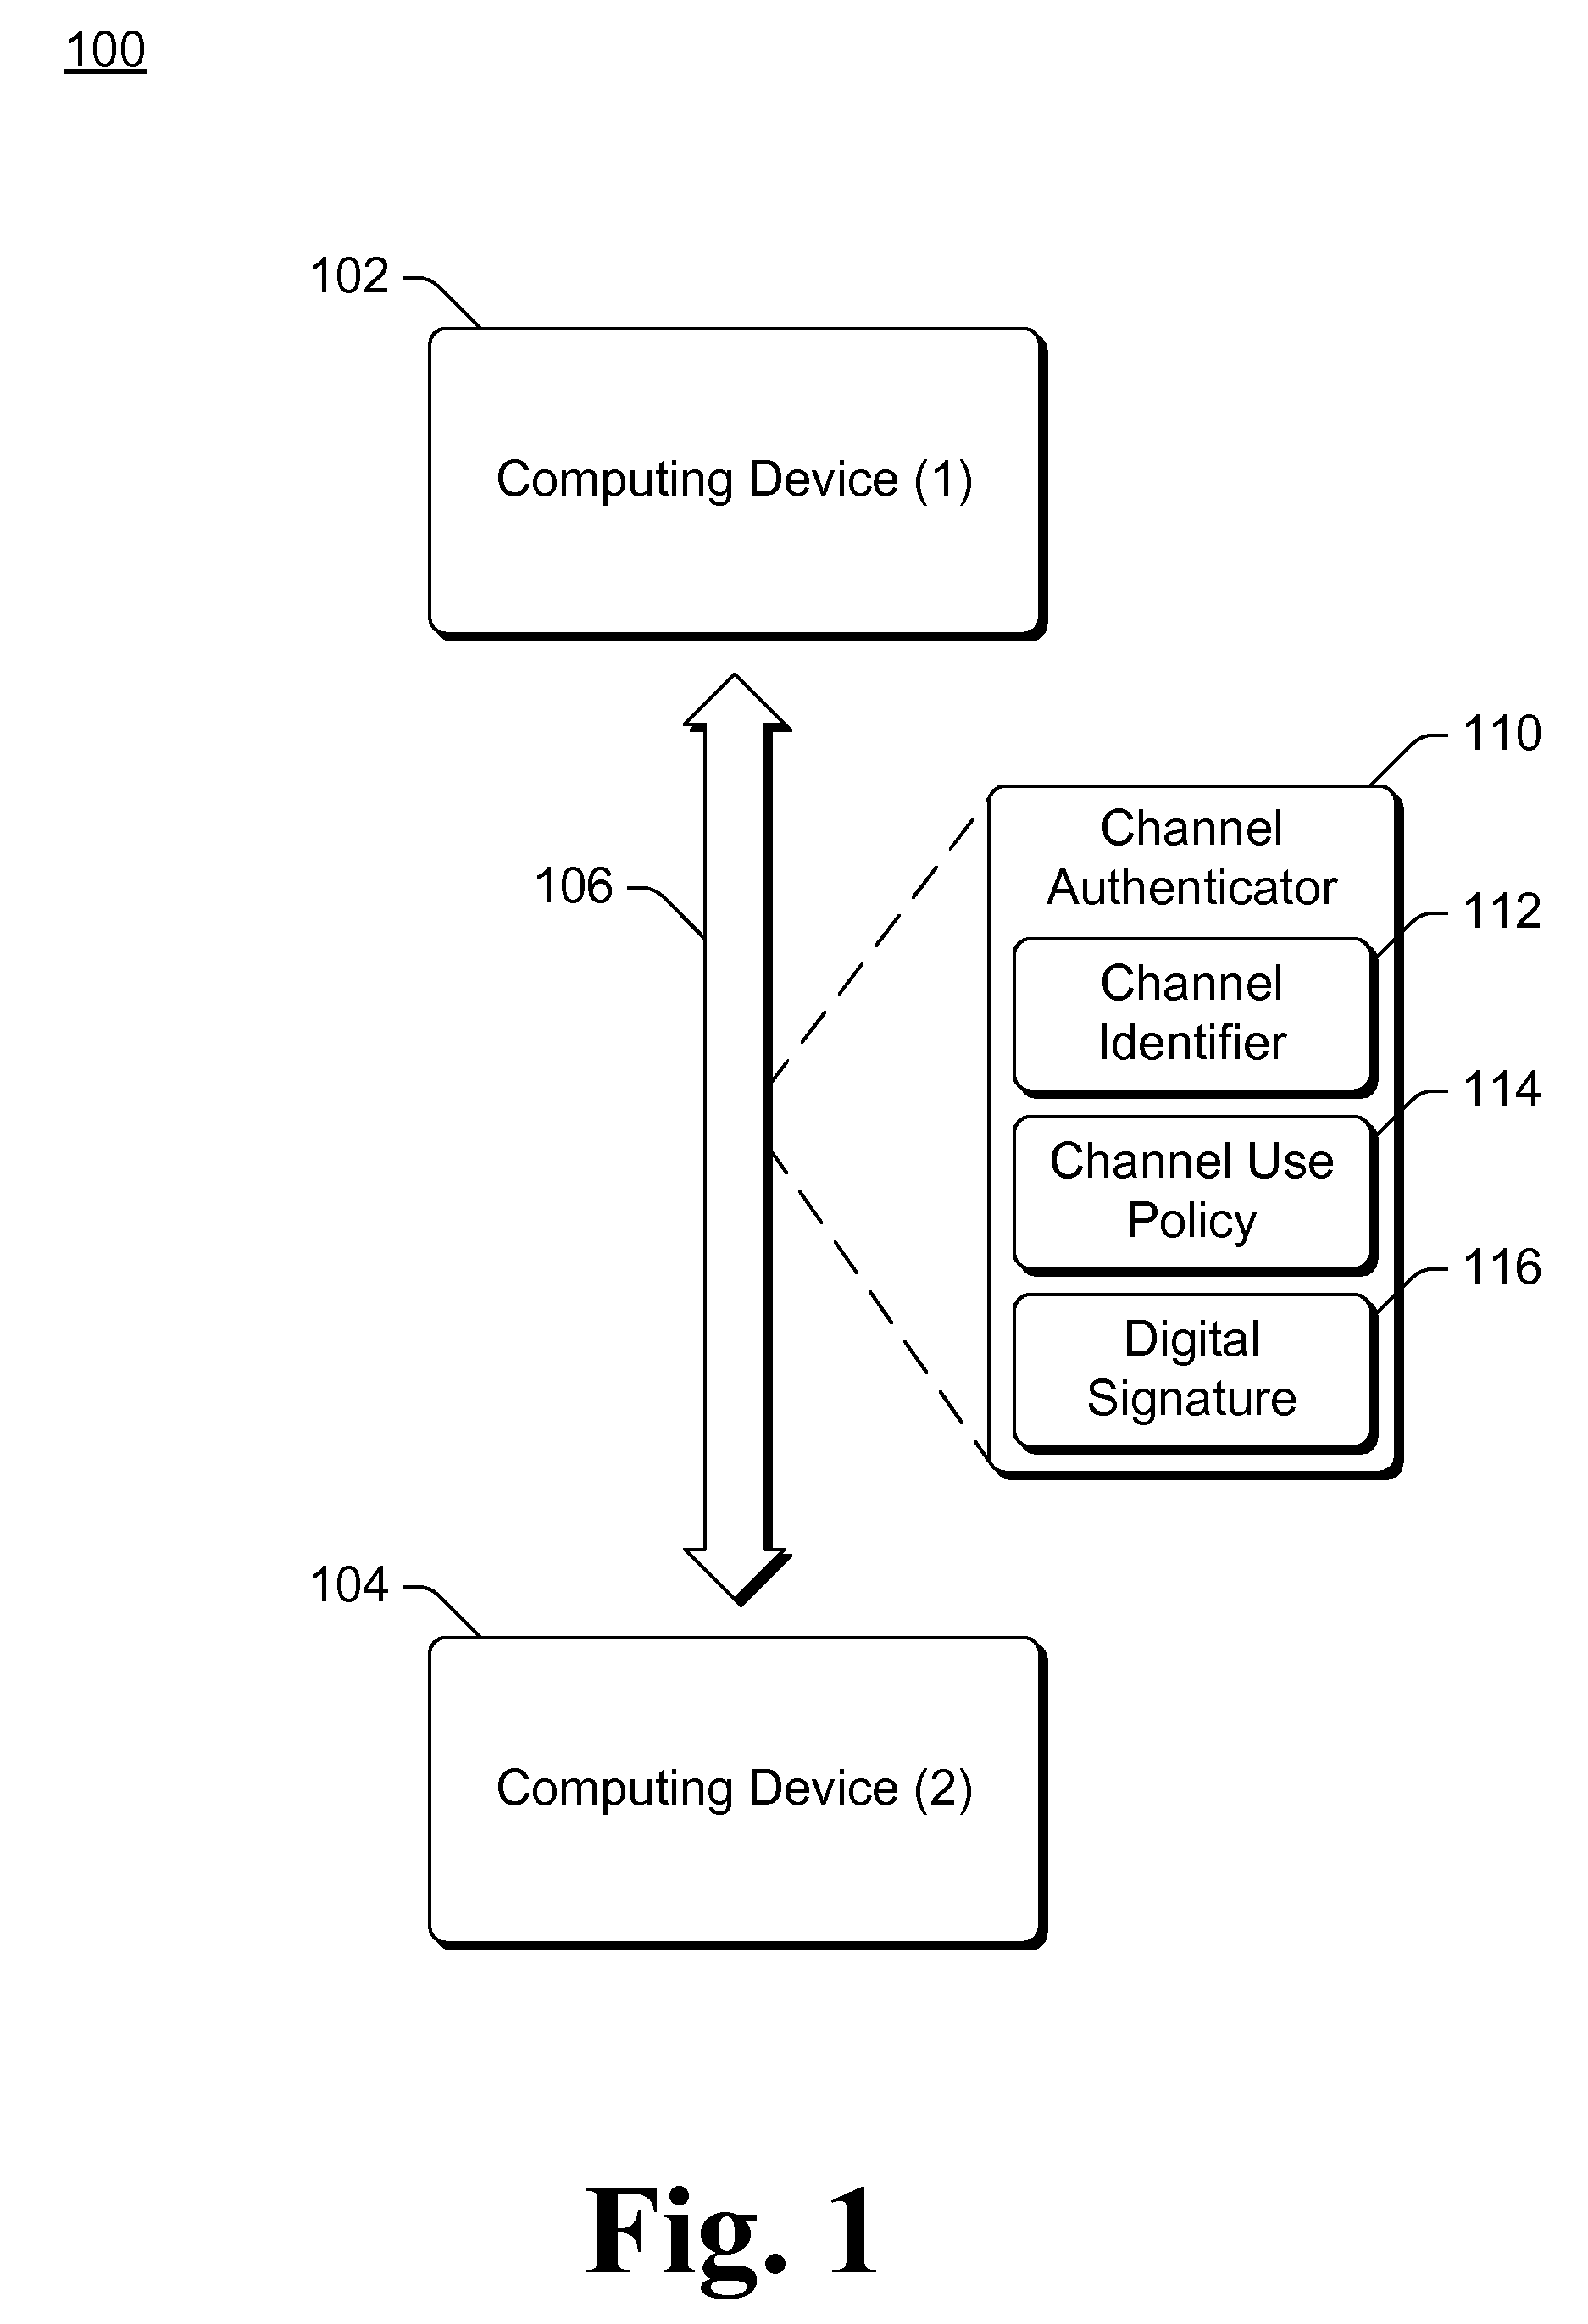 Communication channel access based on channel identifier and use policy